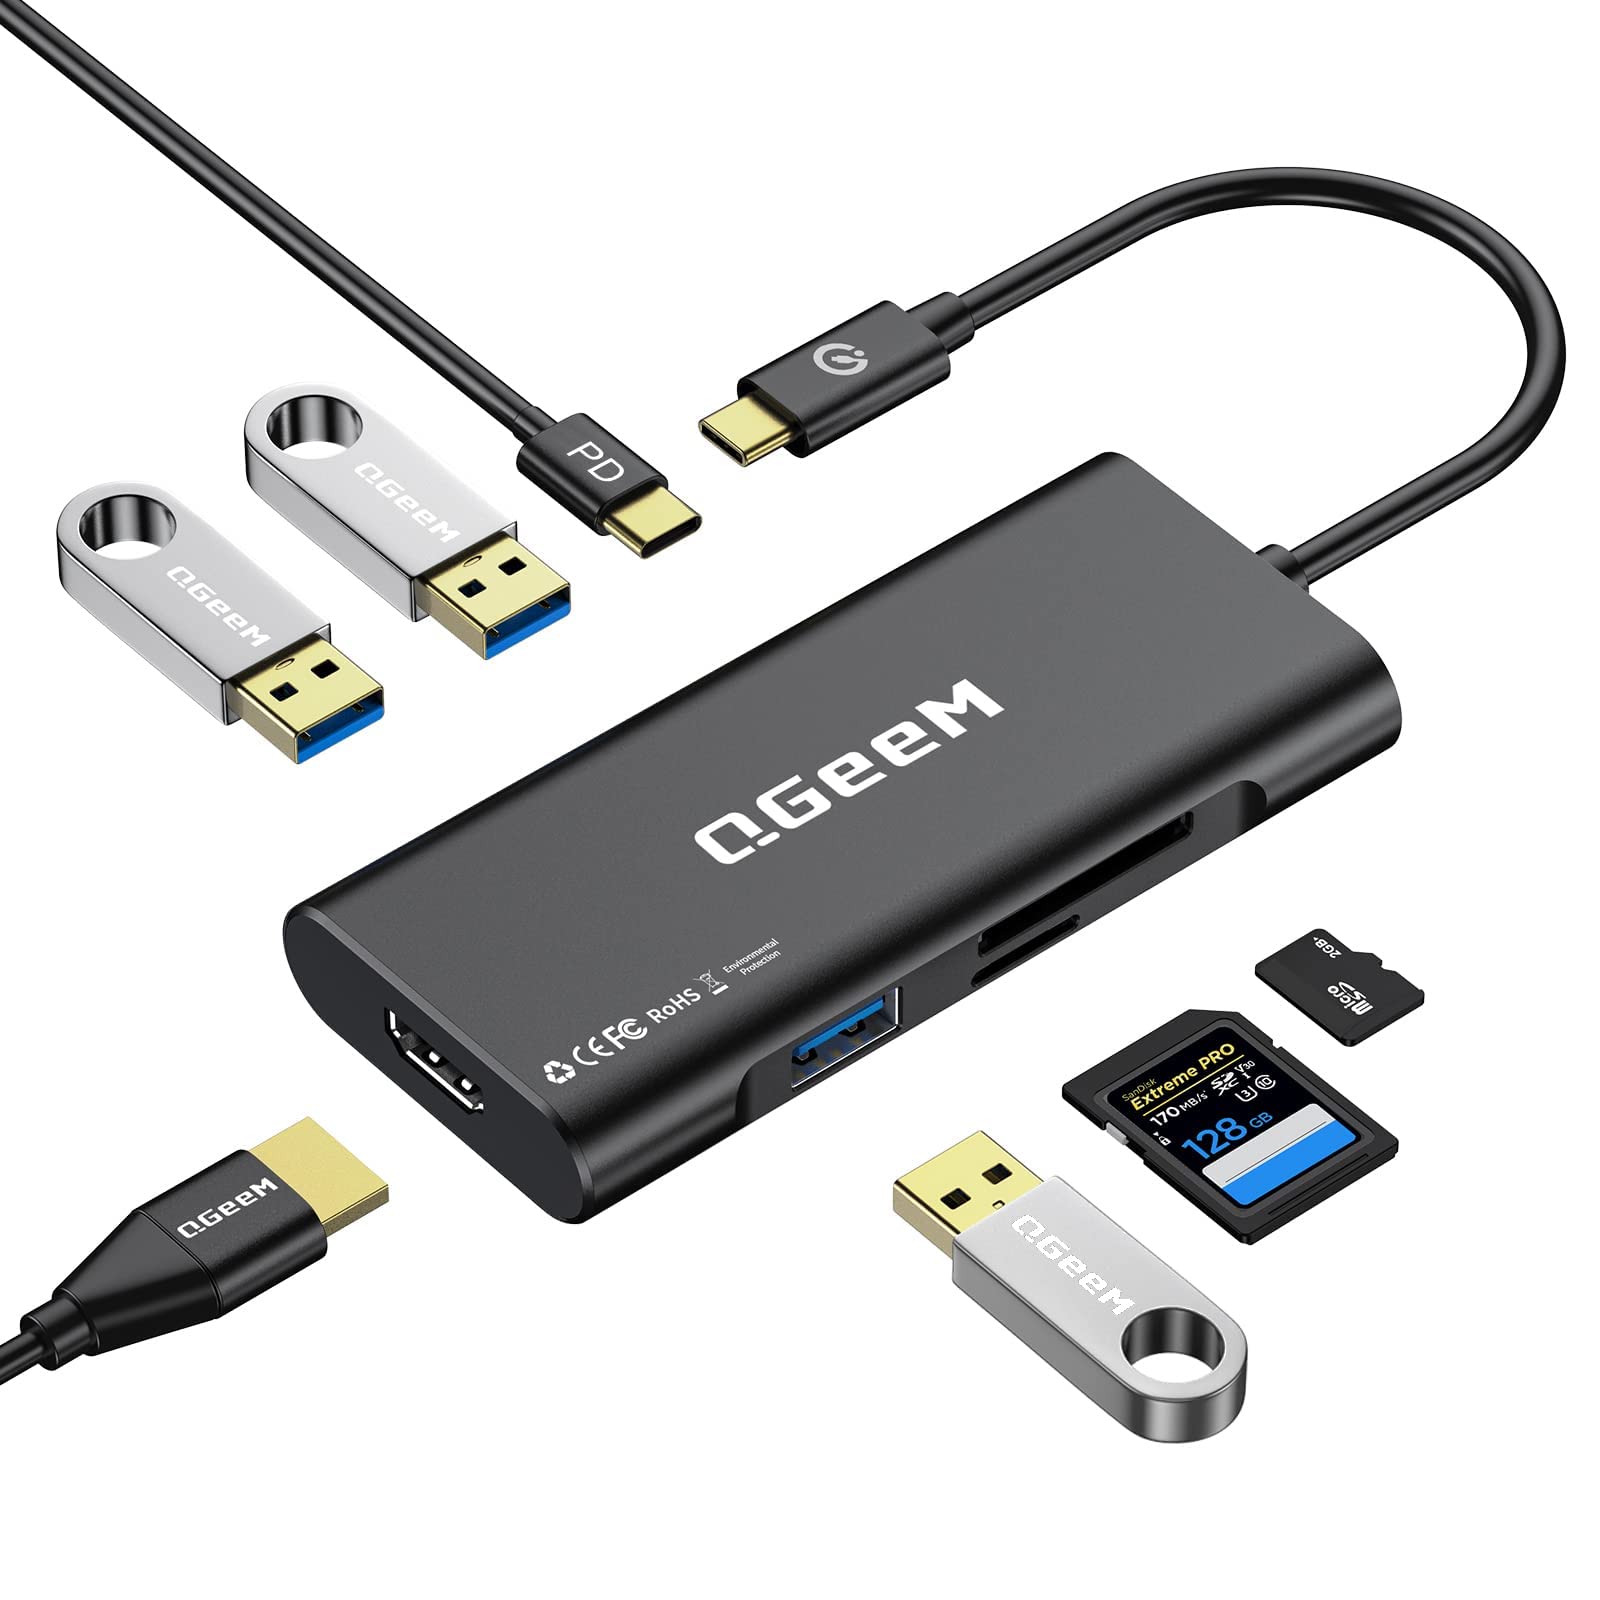 USB C Hub, QGeeM USB C to HDMI Adapter 4k, 7 in 1 USB C Dongle with 100W Power Delivery,3 USB 3.0 Ports, SD/TF Card Reader, Compatible for MacBook Ipad HP Dell XPS and More Type C Device-Black